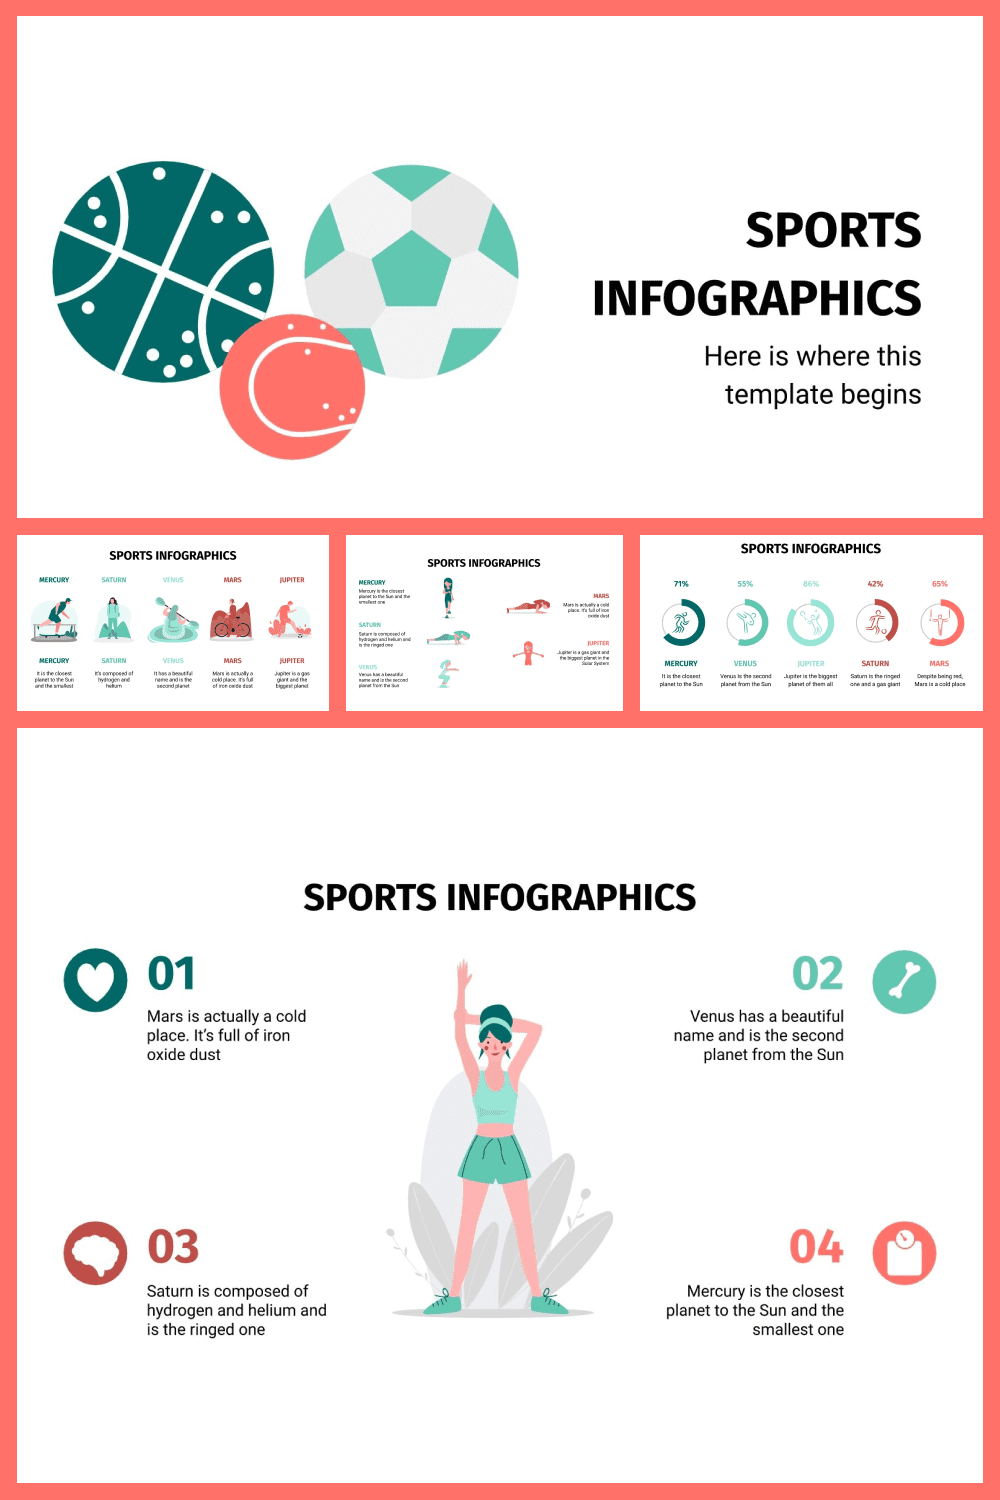 Sports infographic.